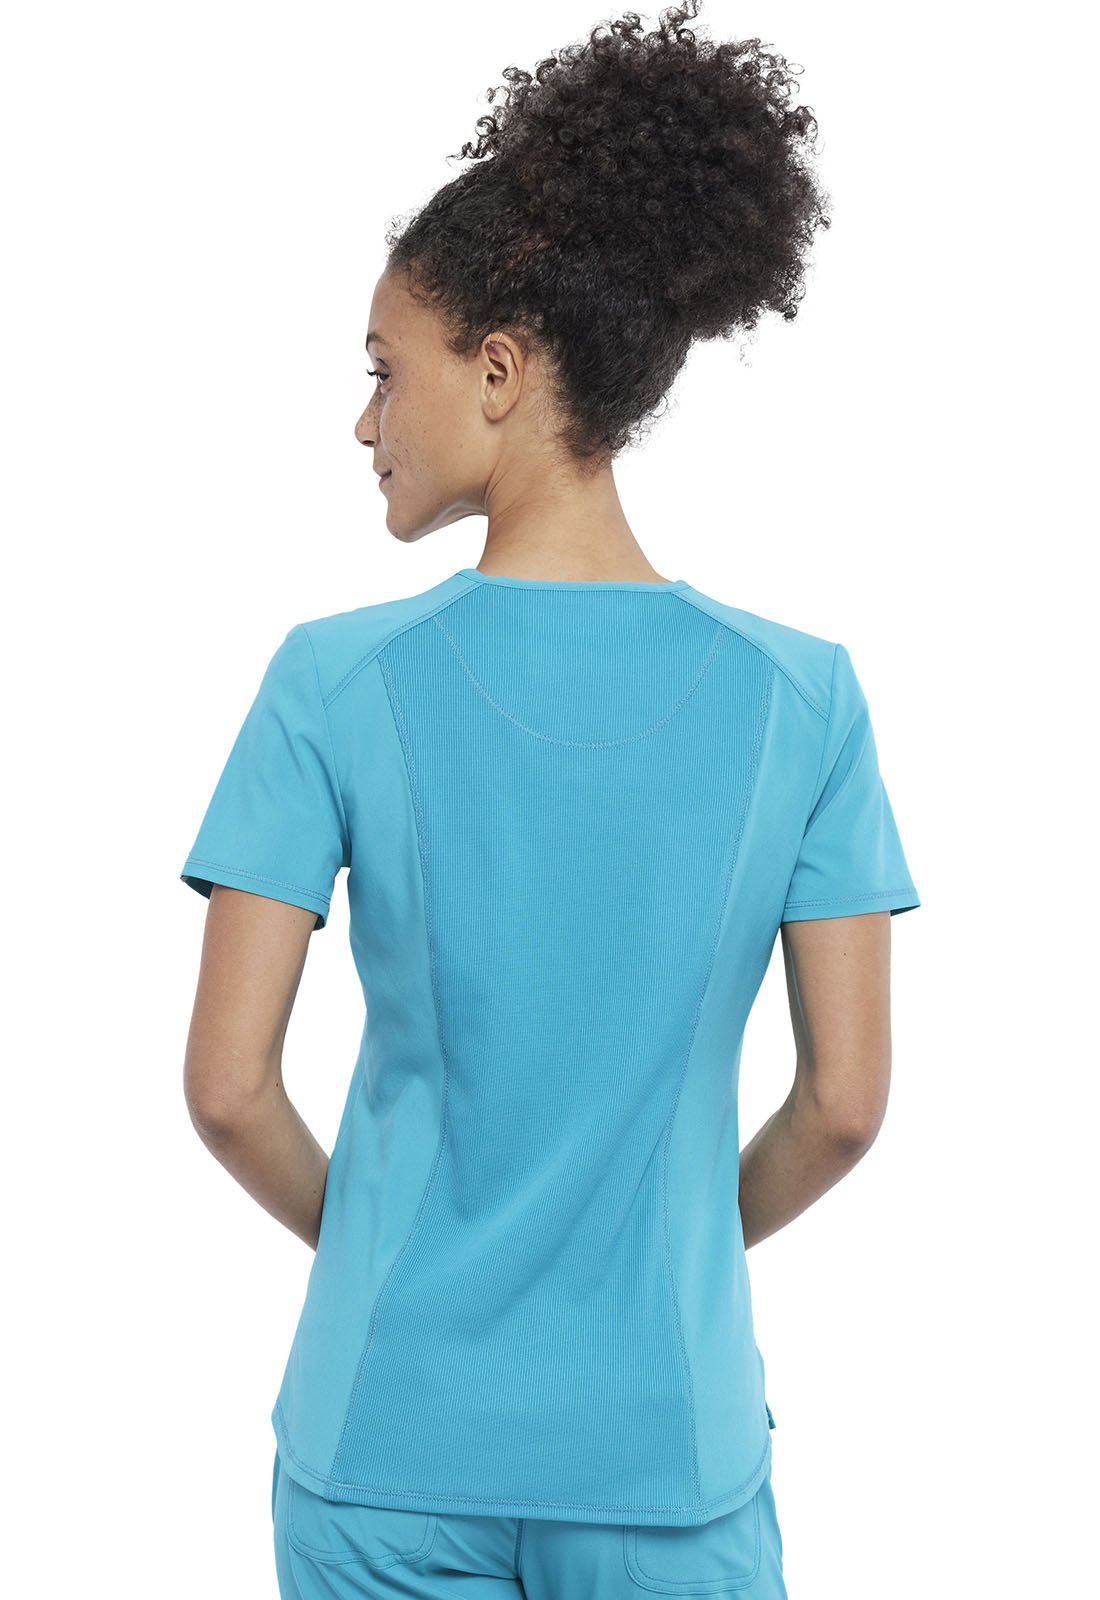 Teal Blue Infinity Scrubs Tuckable V-Neck Top- Back View